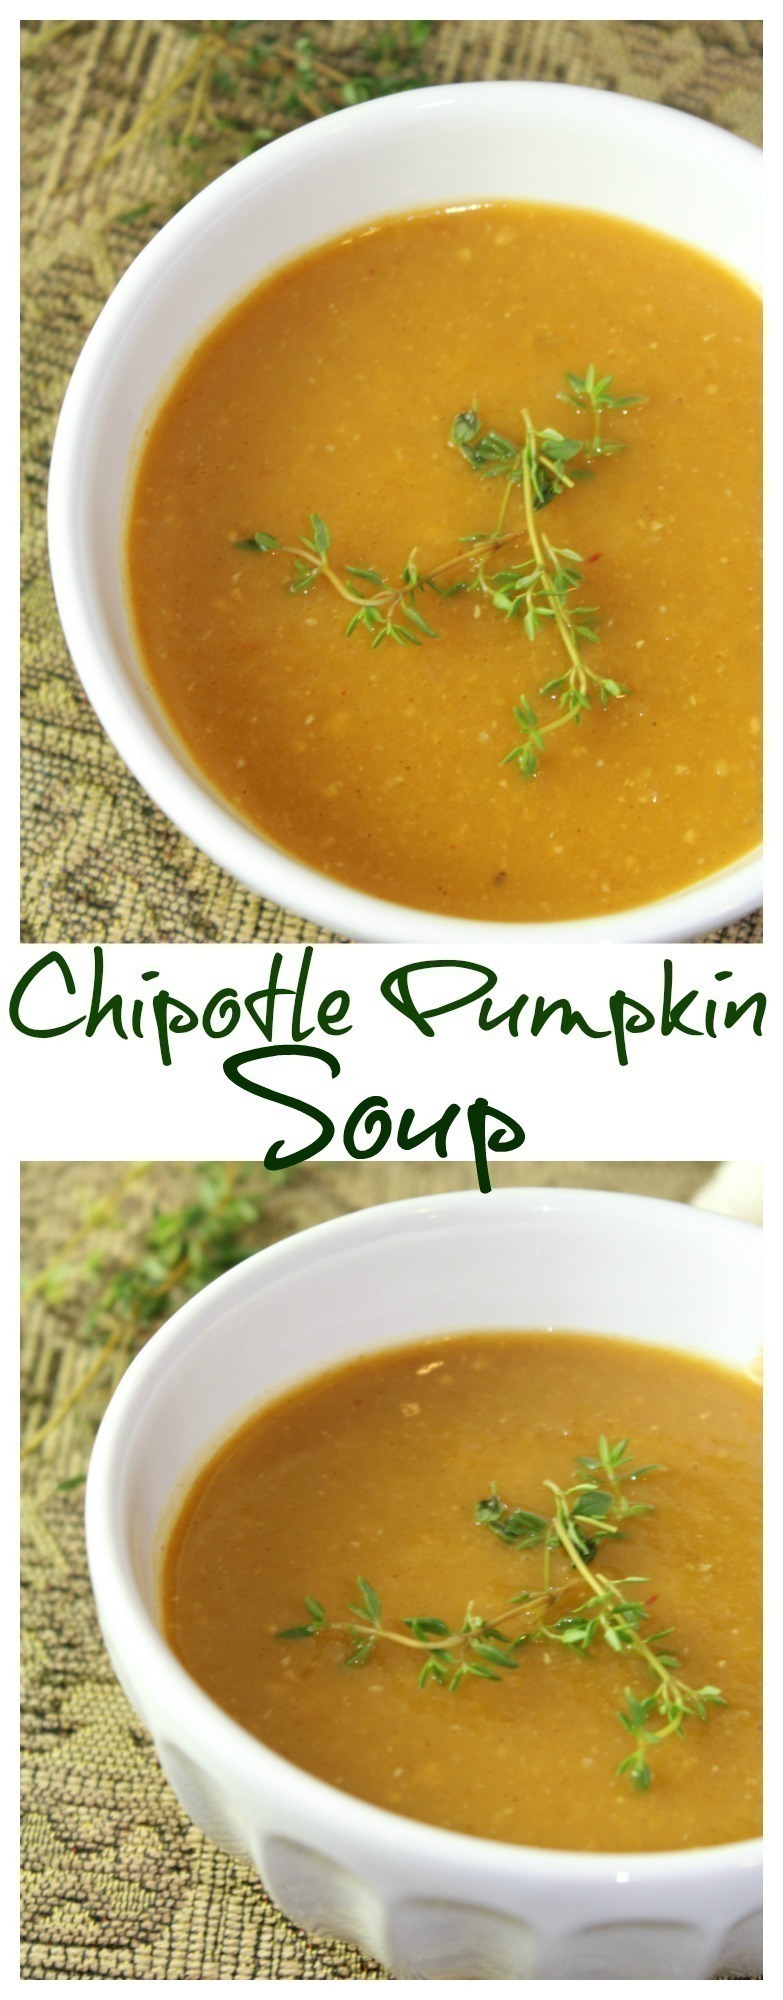 A delicious blend of pumpkin, apples and potatoes taken up a notch with the spicy addition of chipotle peppers.